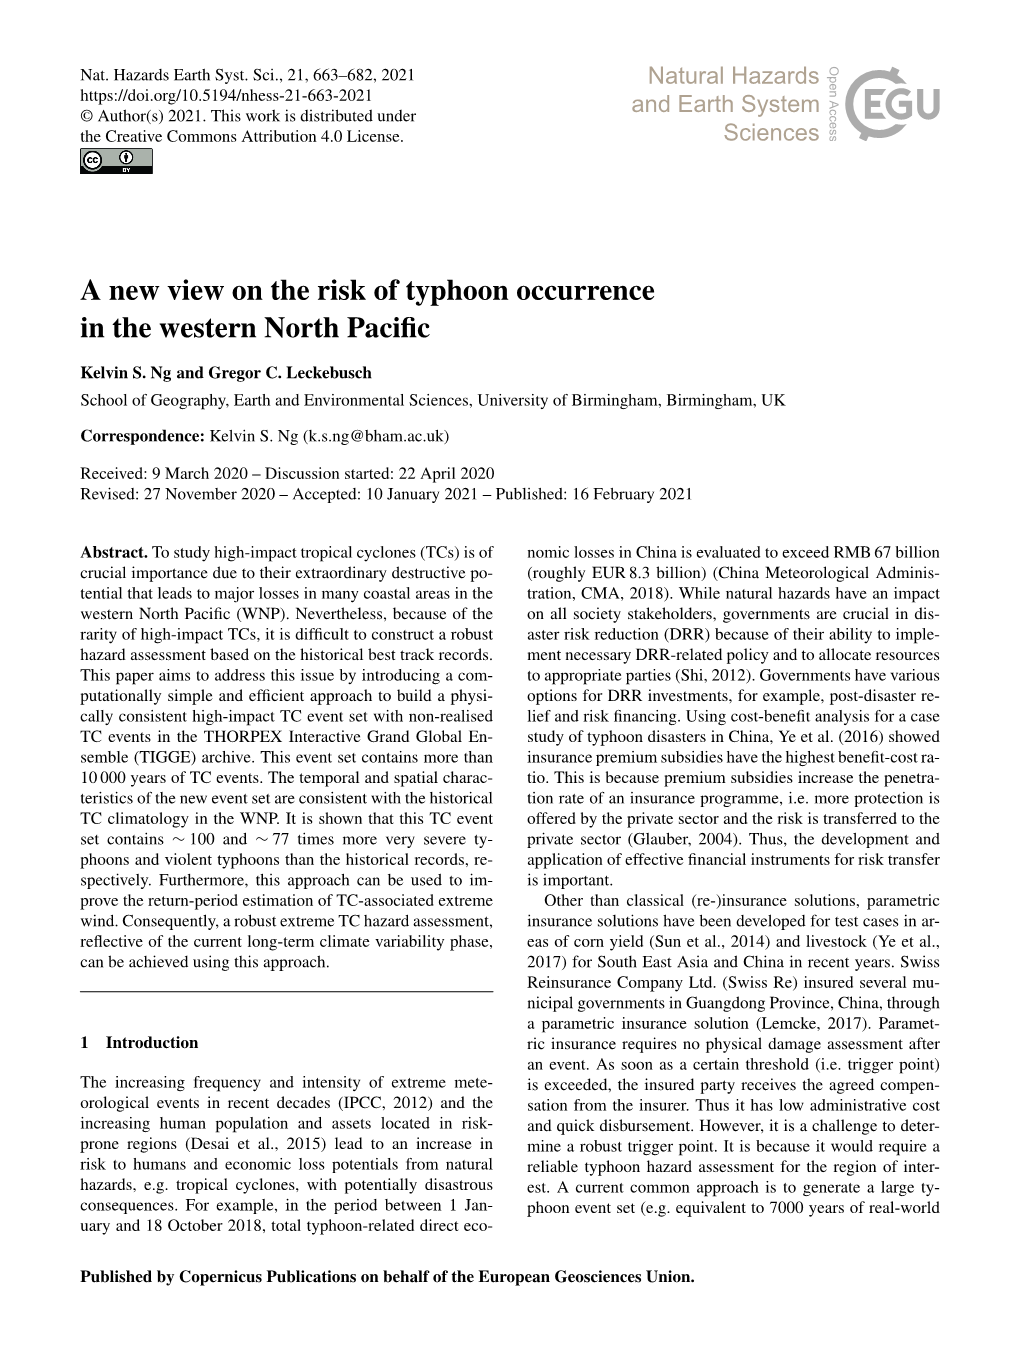 A New View on the Risk of Typhoon Occurrence in the Western North Paciﬁc